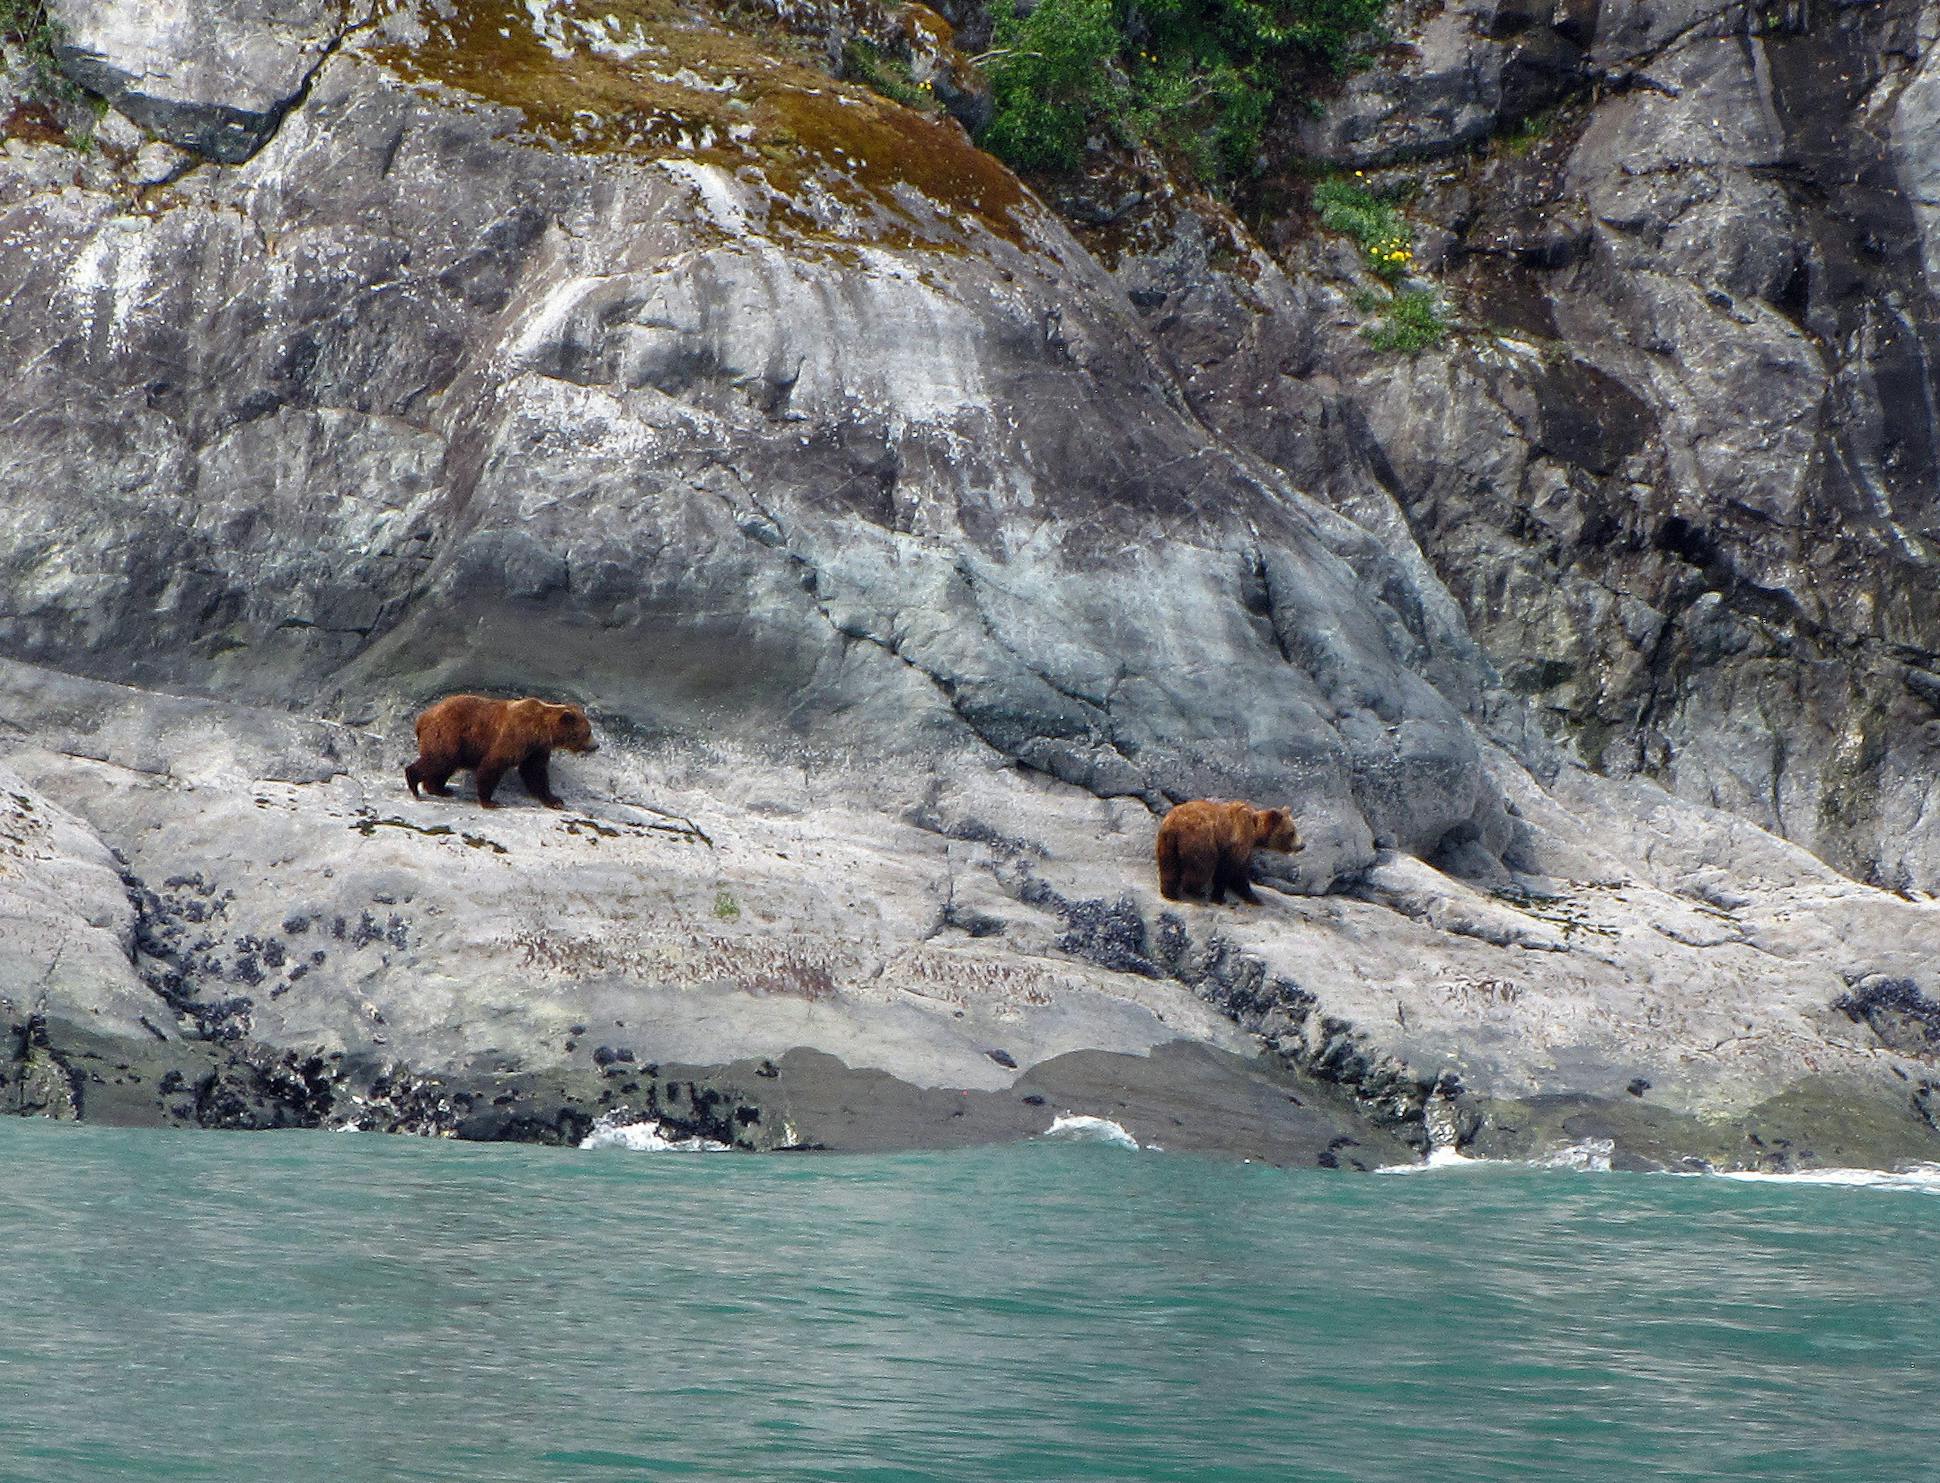 Brown bears were spotted along the shoreline from the tour boat. They roamed along, turning around rocks on beaches to look for salty tidal delicacies.